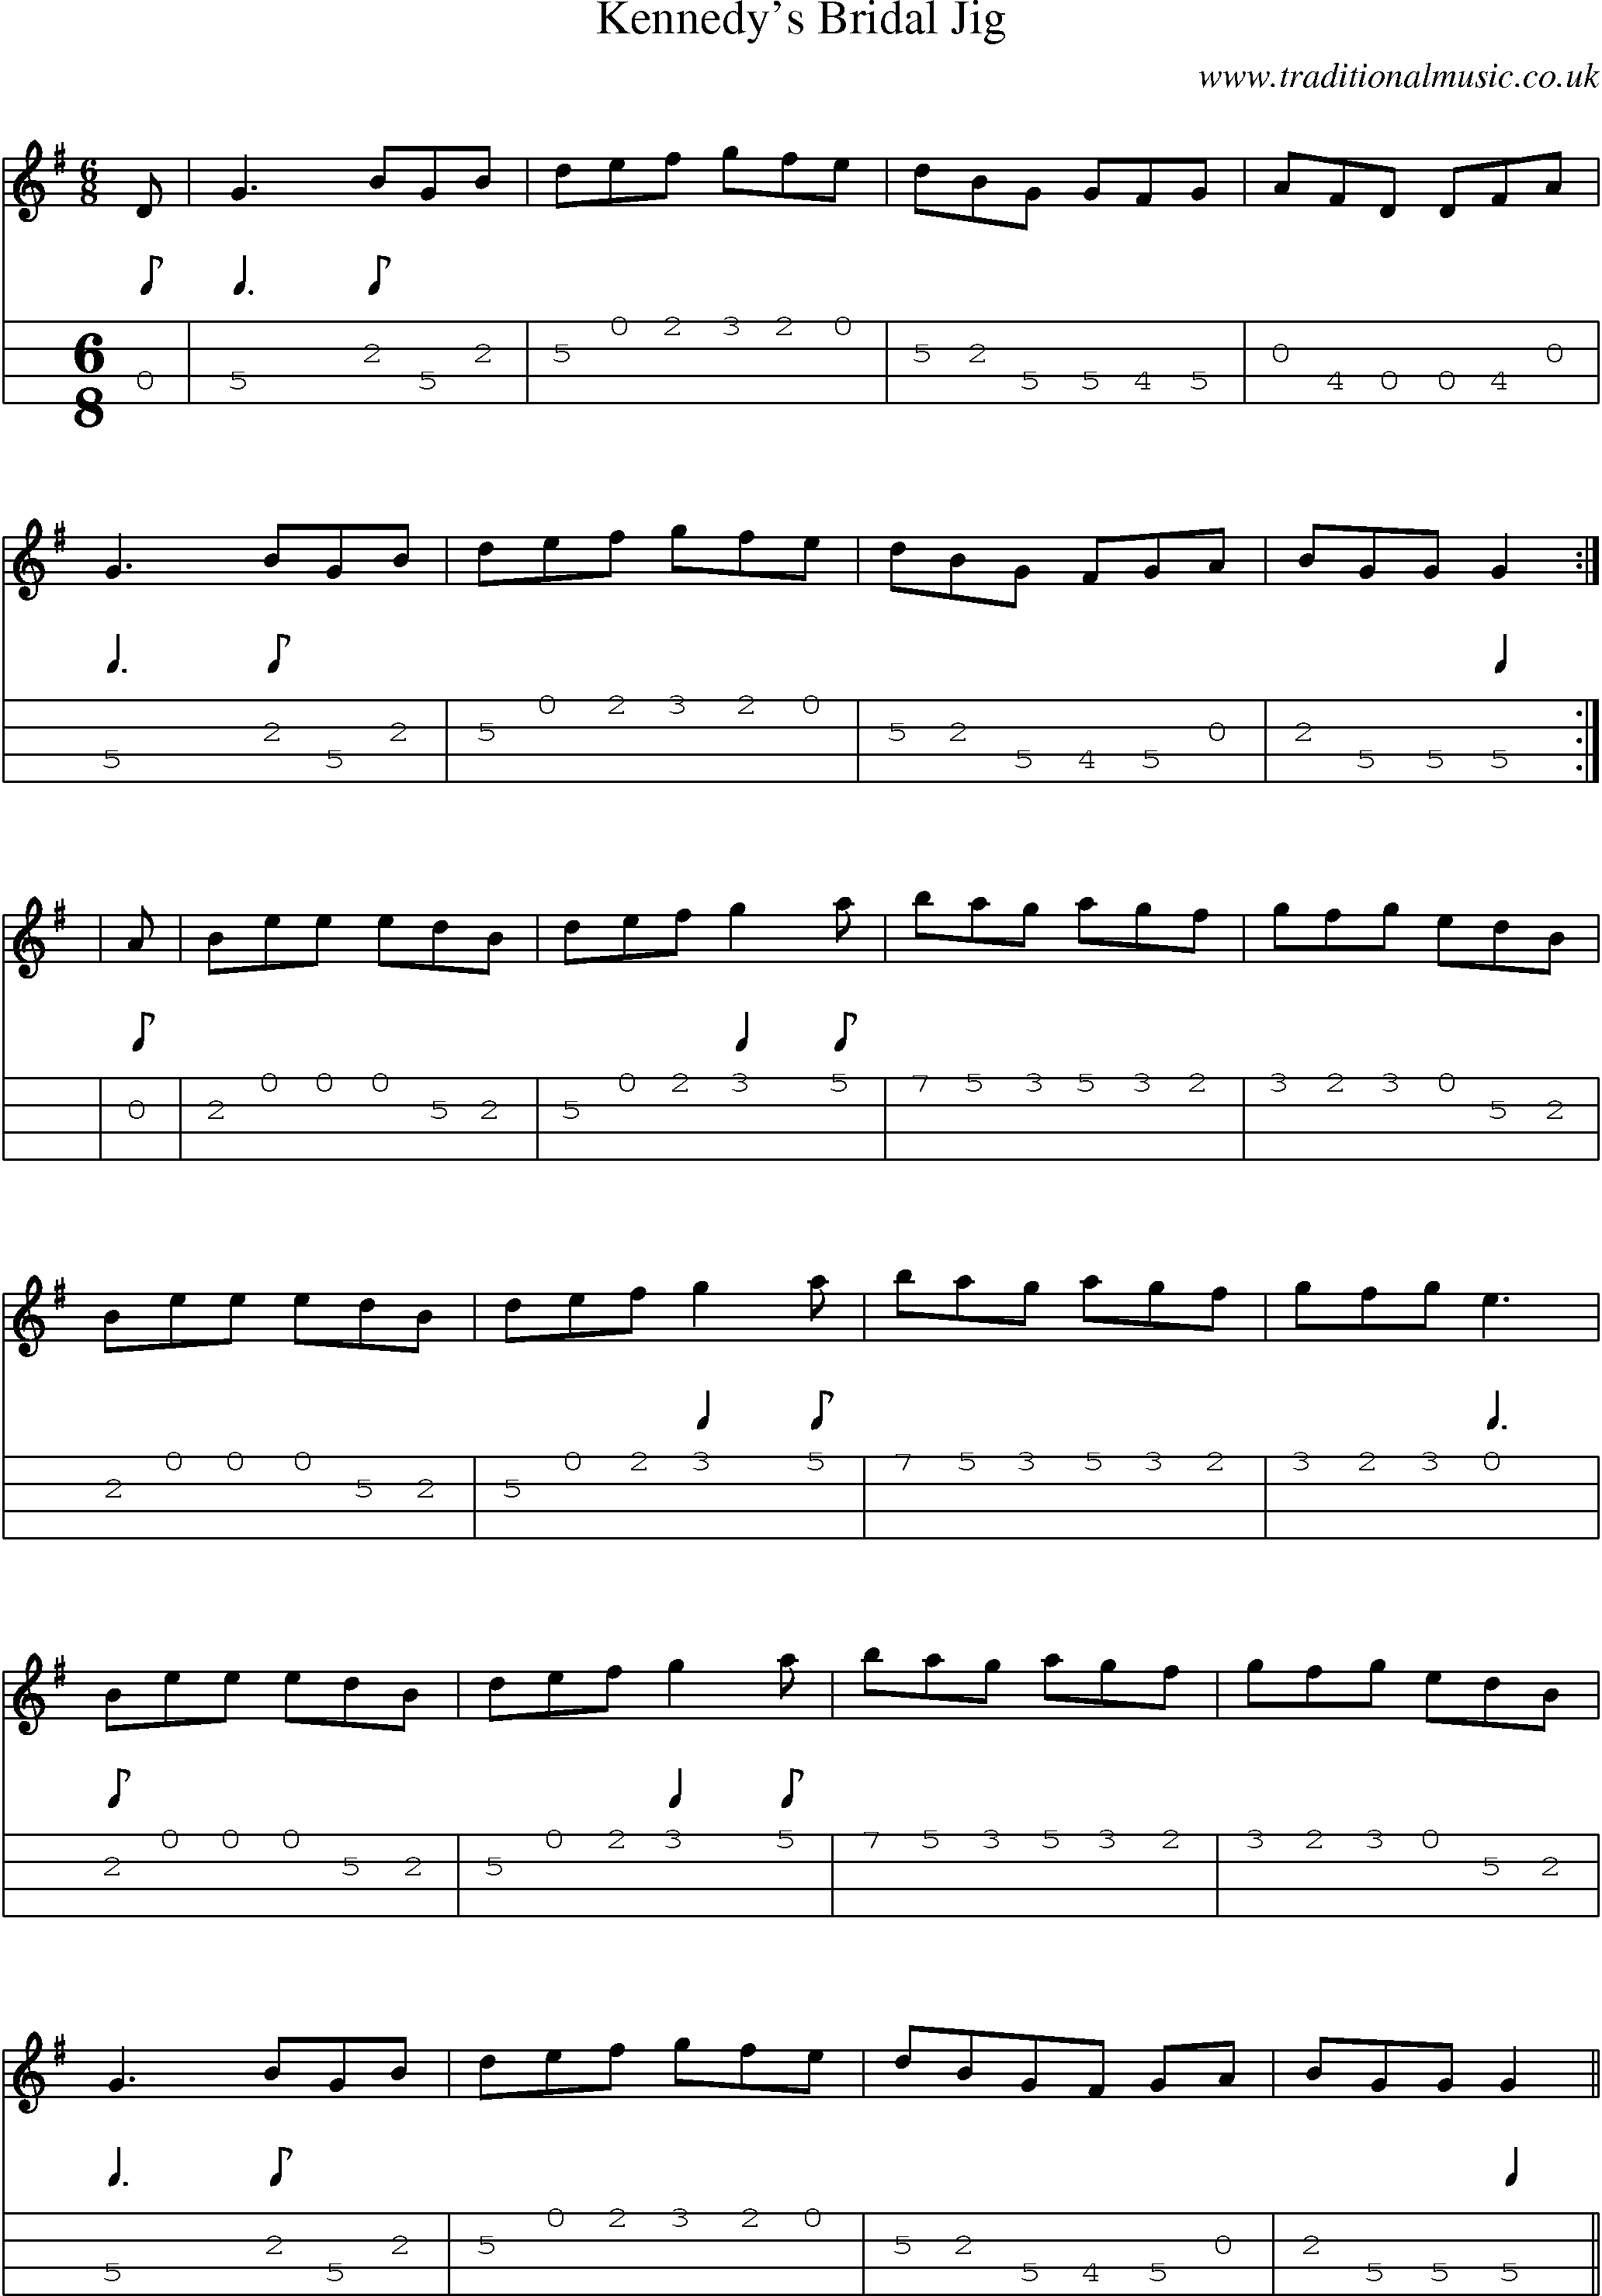 Music Score and Mandolin Tabs for Kennedys Bridal Jig